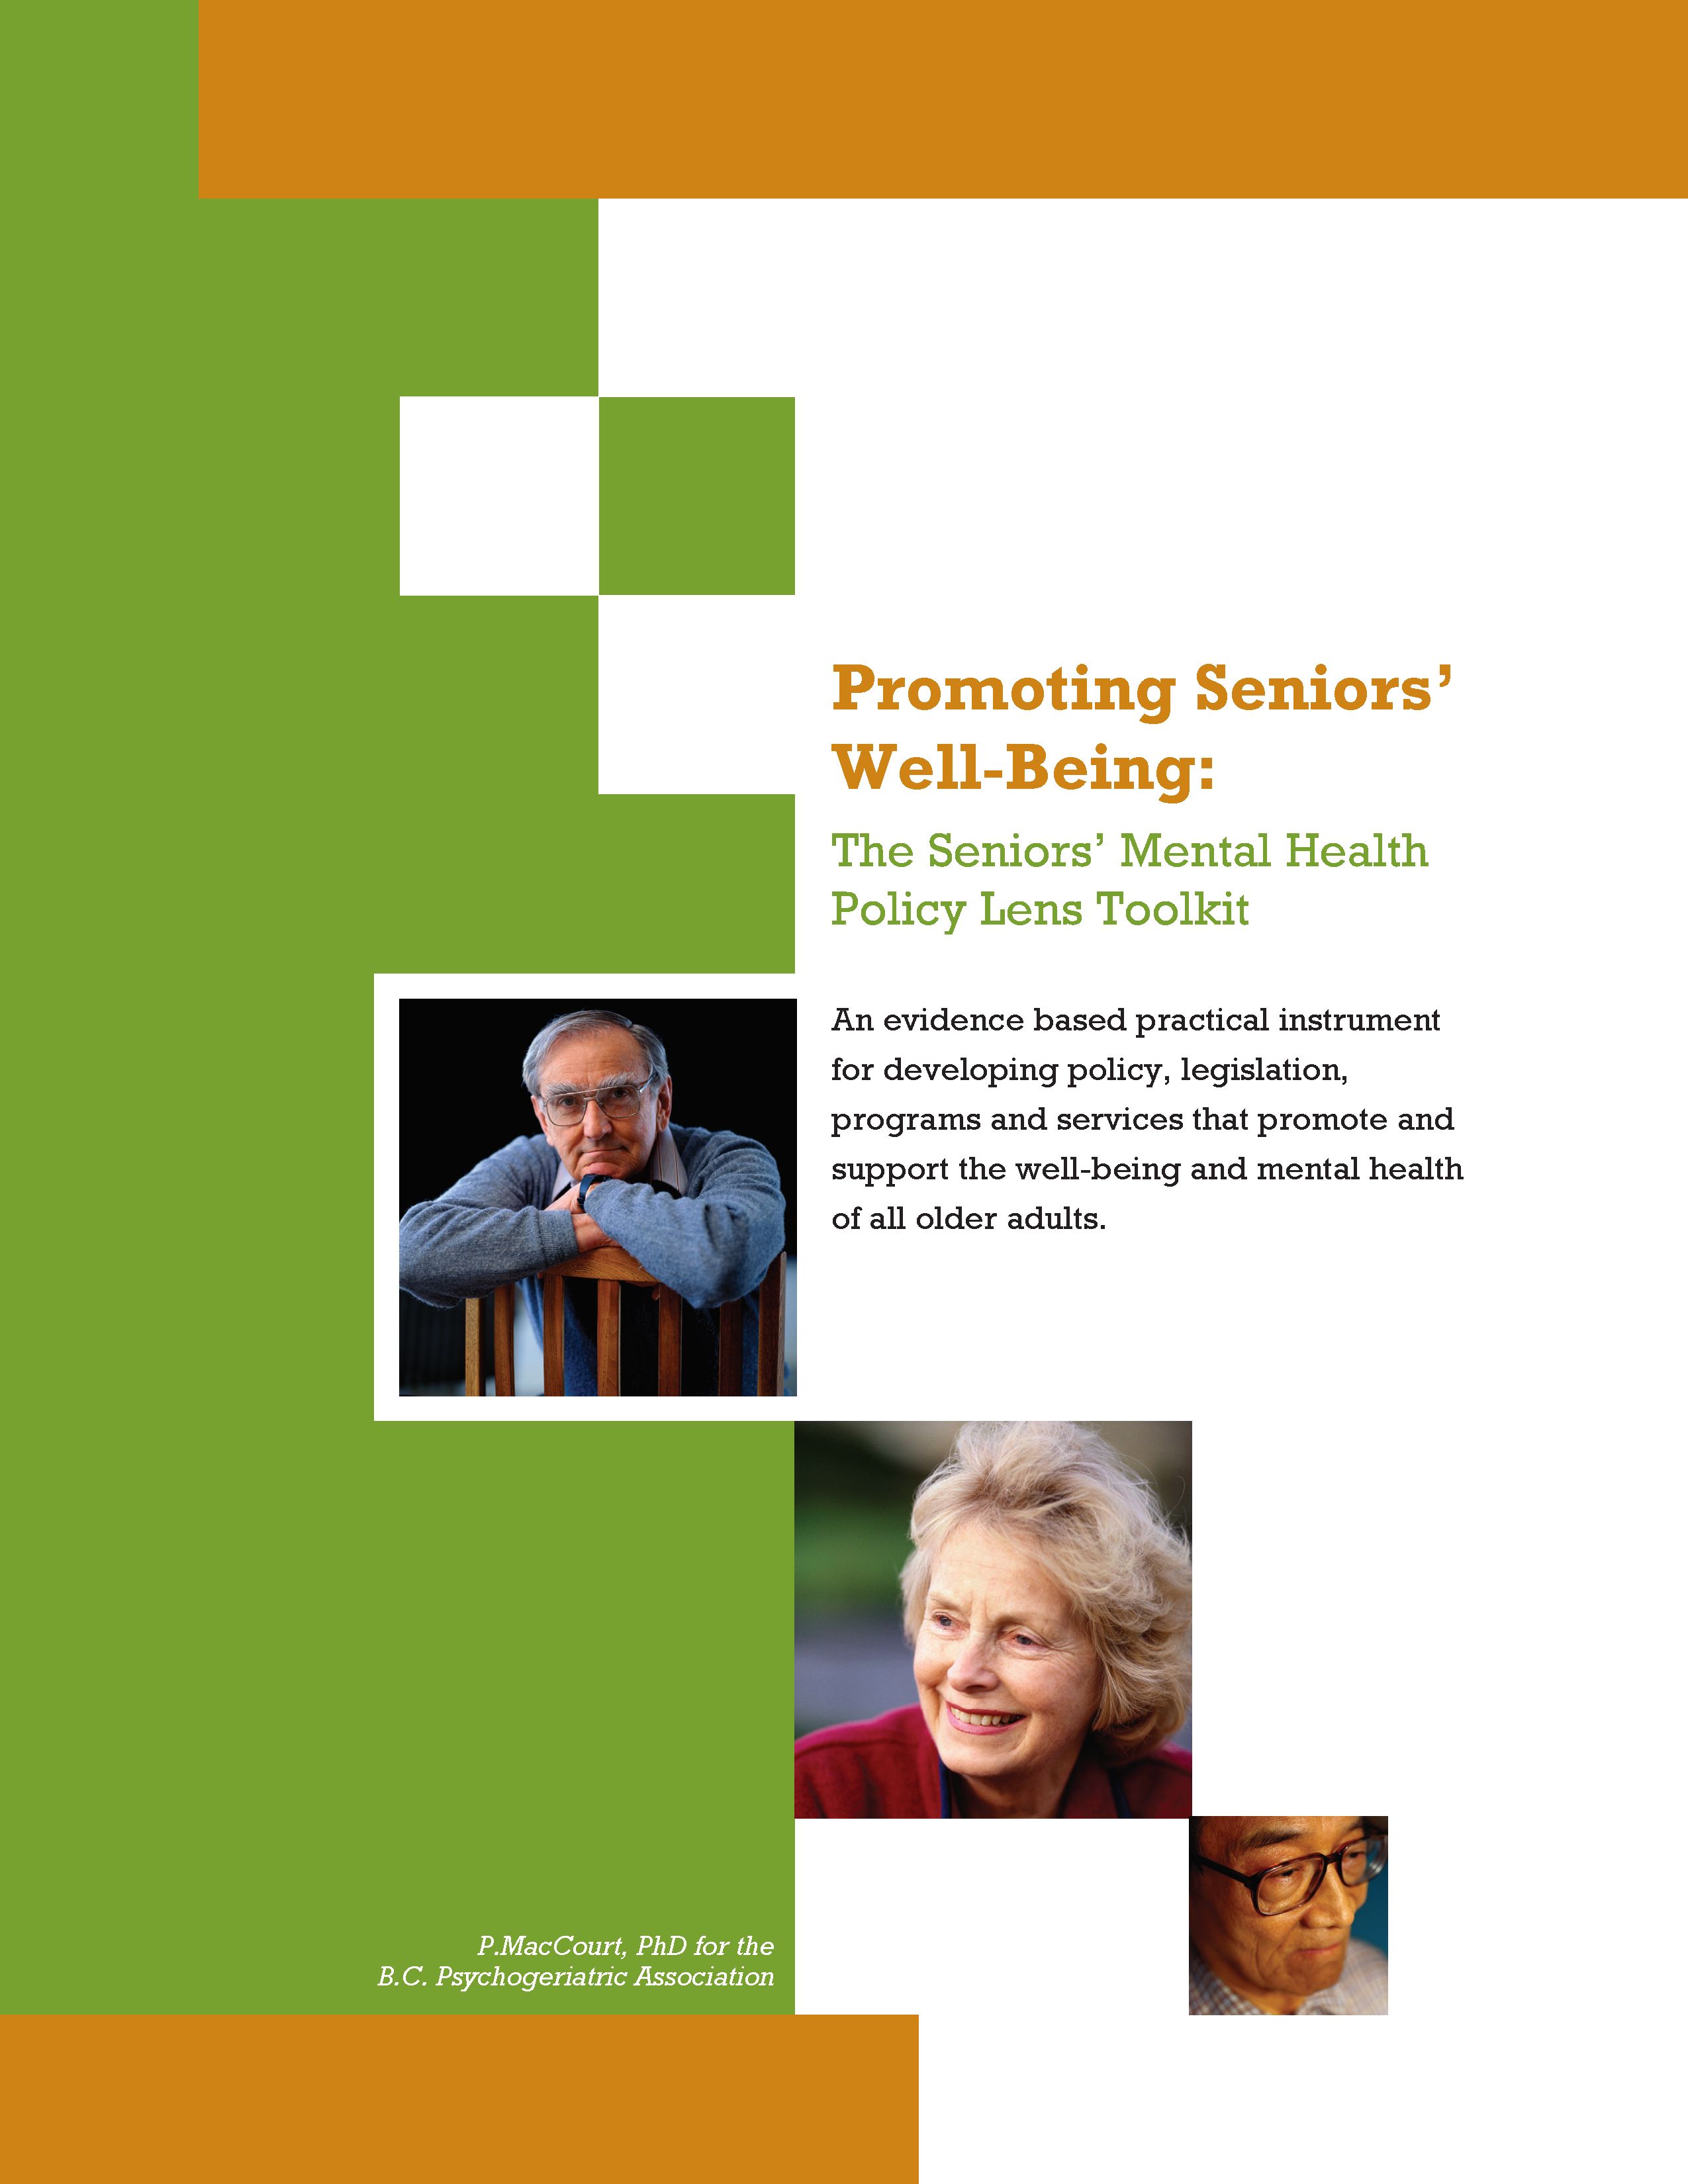 On a green, white, and orange background, we see three photos of older adults: a white man with glasses sitting backwards on a chair, a smiling white woman, and an older Asian man wearing glasses. On the right-hand side on a white background, we read, “Promoting Seniors’ Well-Being:” in orange text followed by “The Seniors’ Mental Health Policy Lens Toolkit” in green text, and finally, “An evidence based practical instrument for developing policy, legislation, programs and services that promote and support the well-being and mental health of all older adults.” in black text. At the bottom left, in white text on a green background, we find the author credit: “P.MacCourt, PhD for the B.C. Psychogeriatric Association”.